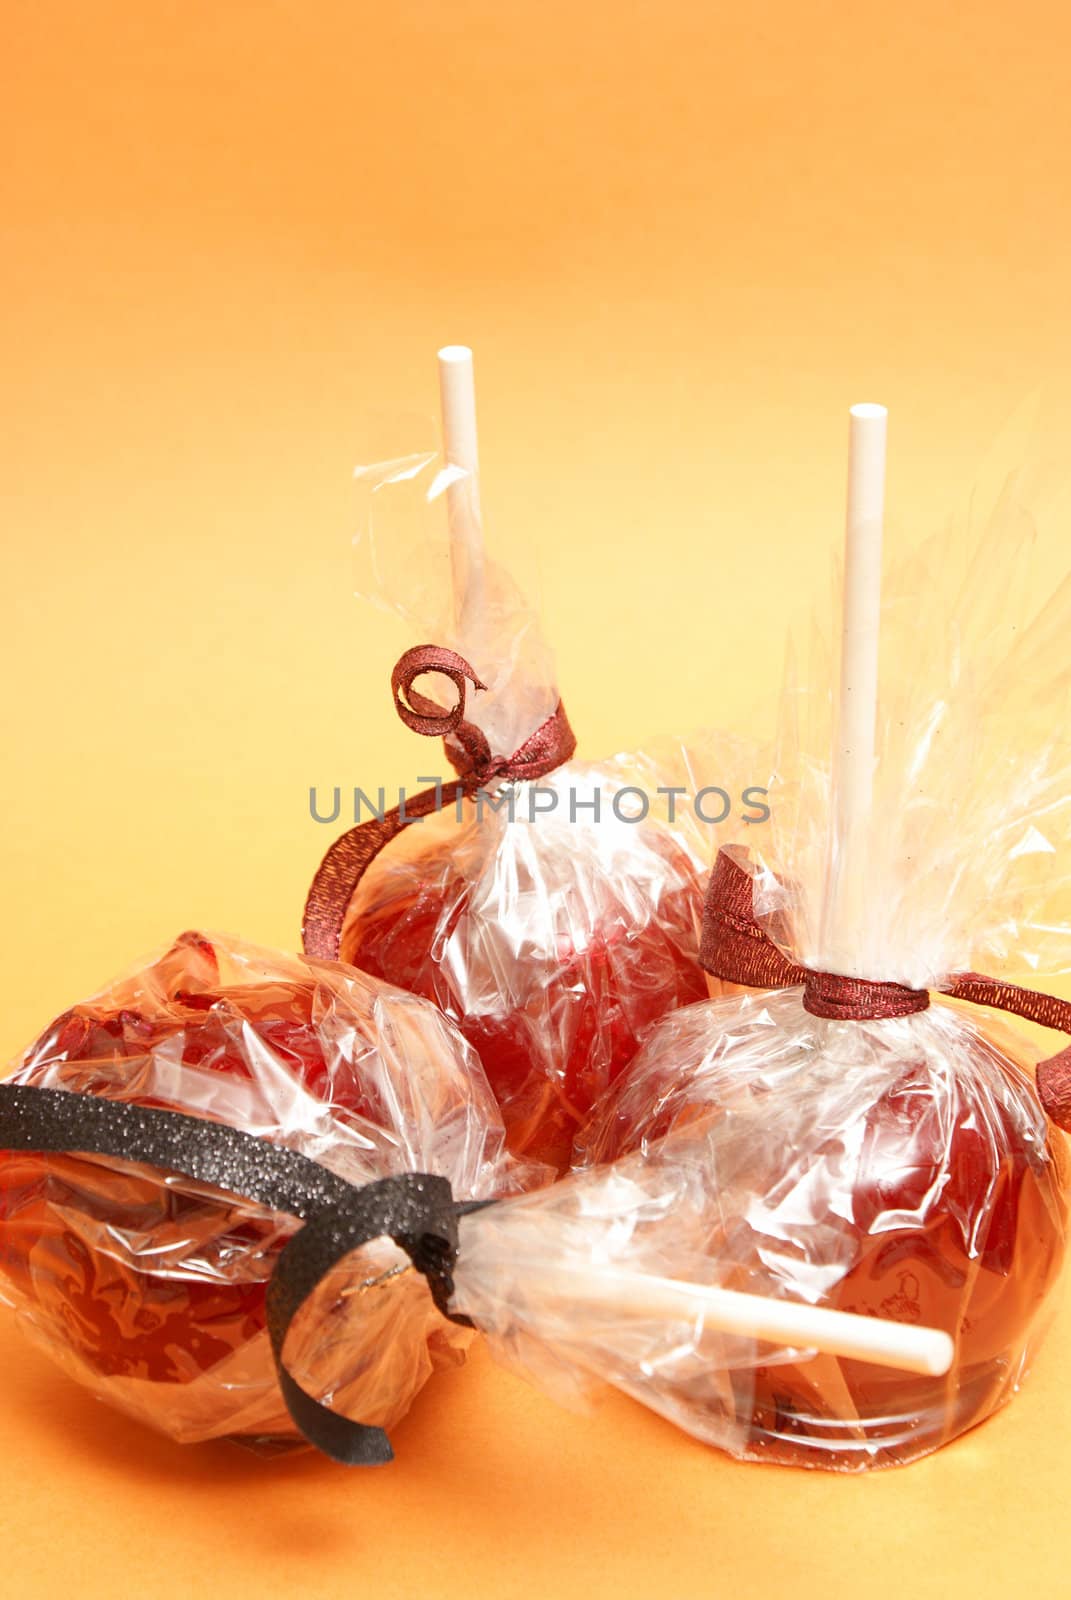 Three red candy apples in plastic wrappers ready for treating the sweet tooth.